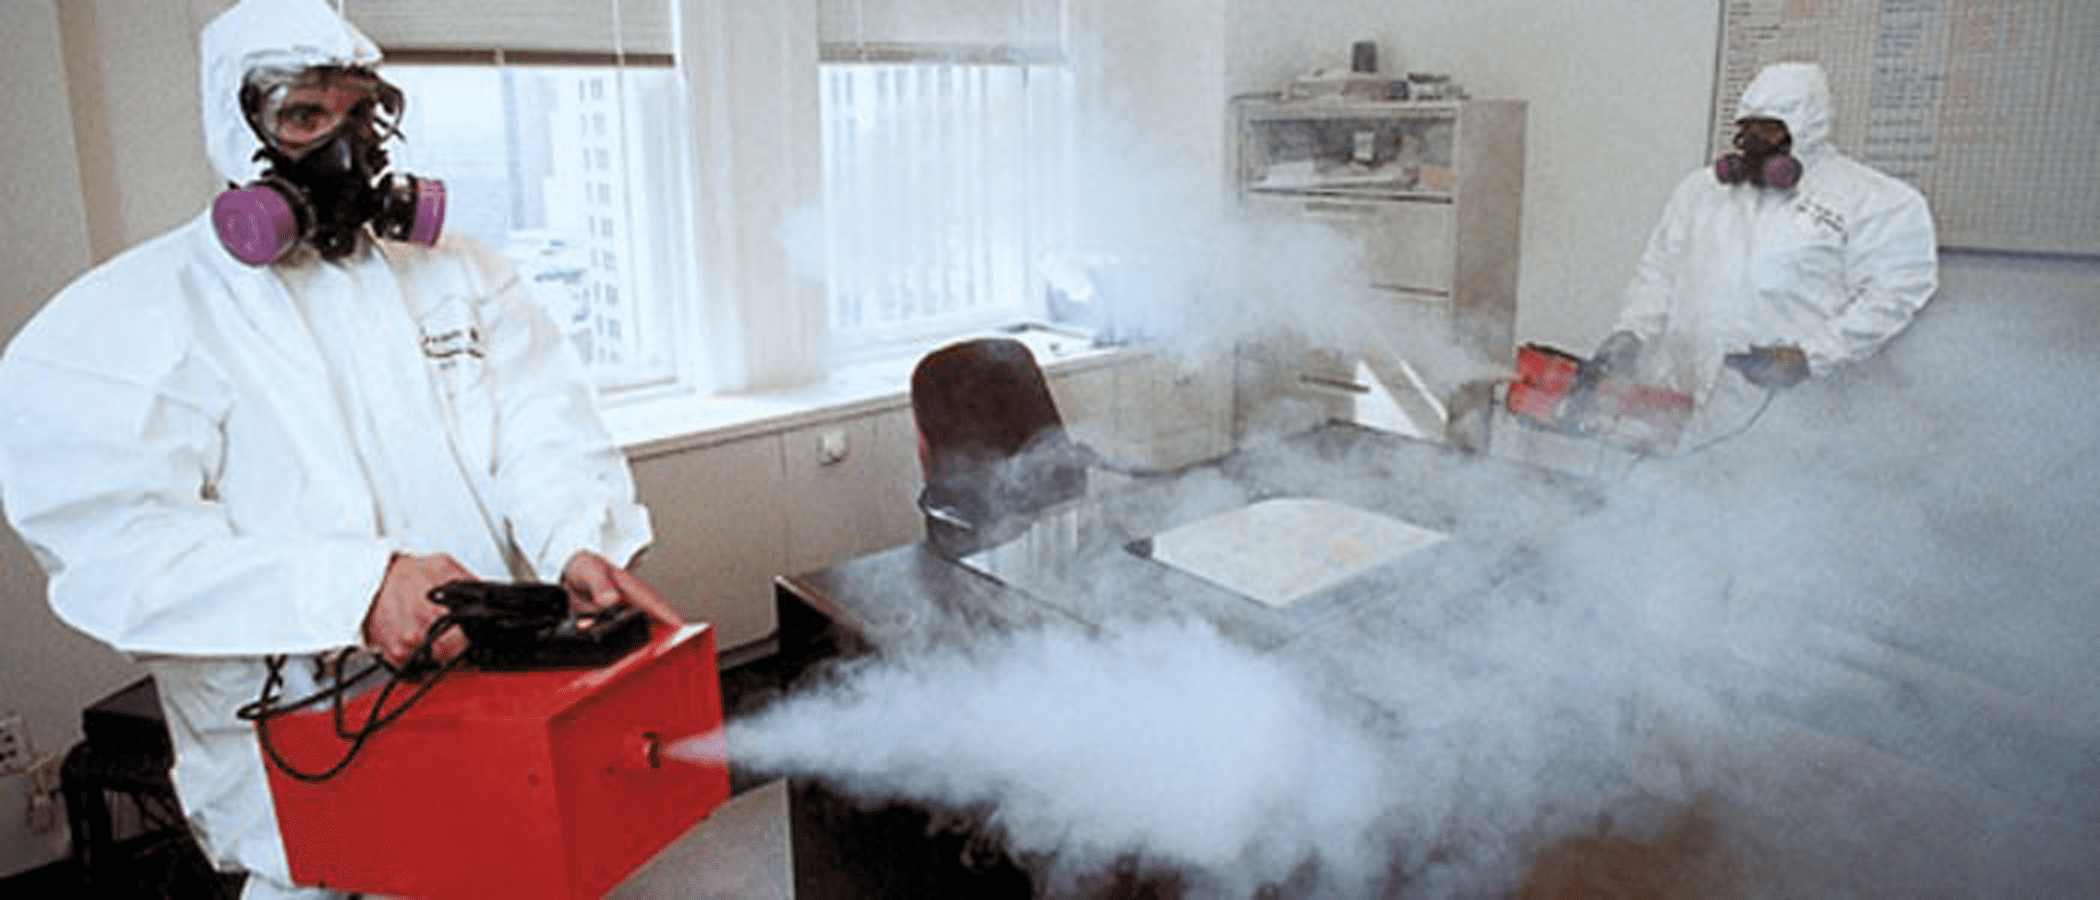 Take Advantage of Our Antimicrobial Fogging Method | Rid Your Space of Germs & Diseases